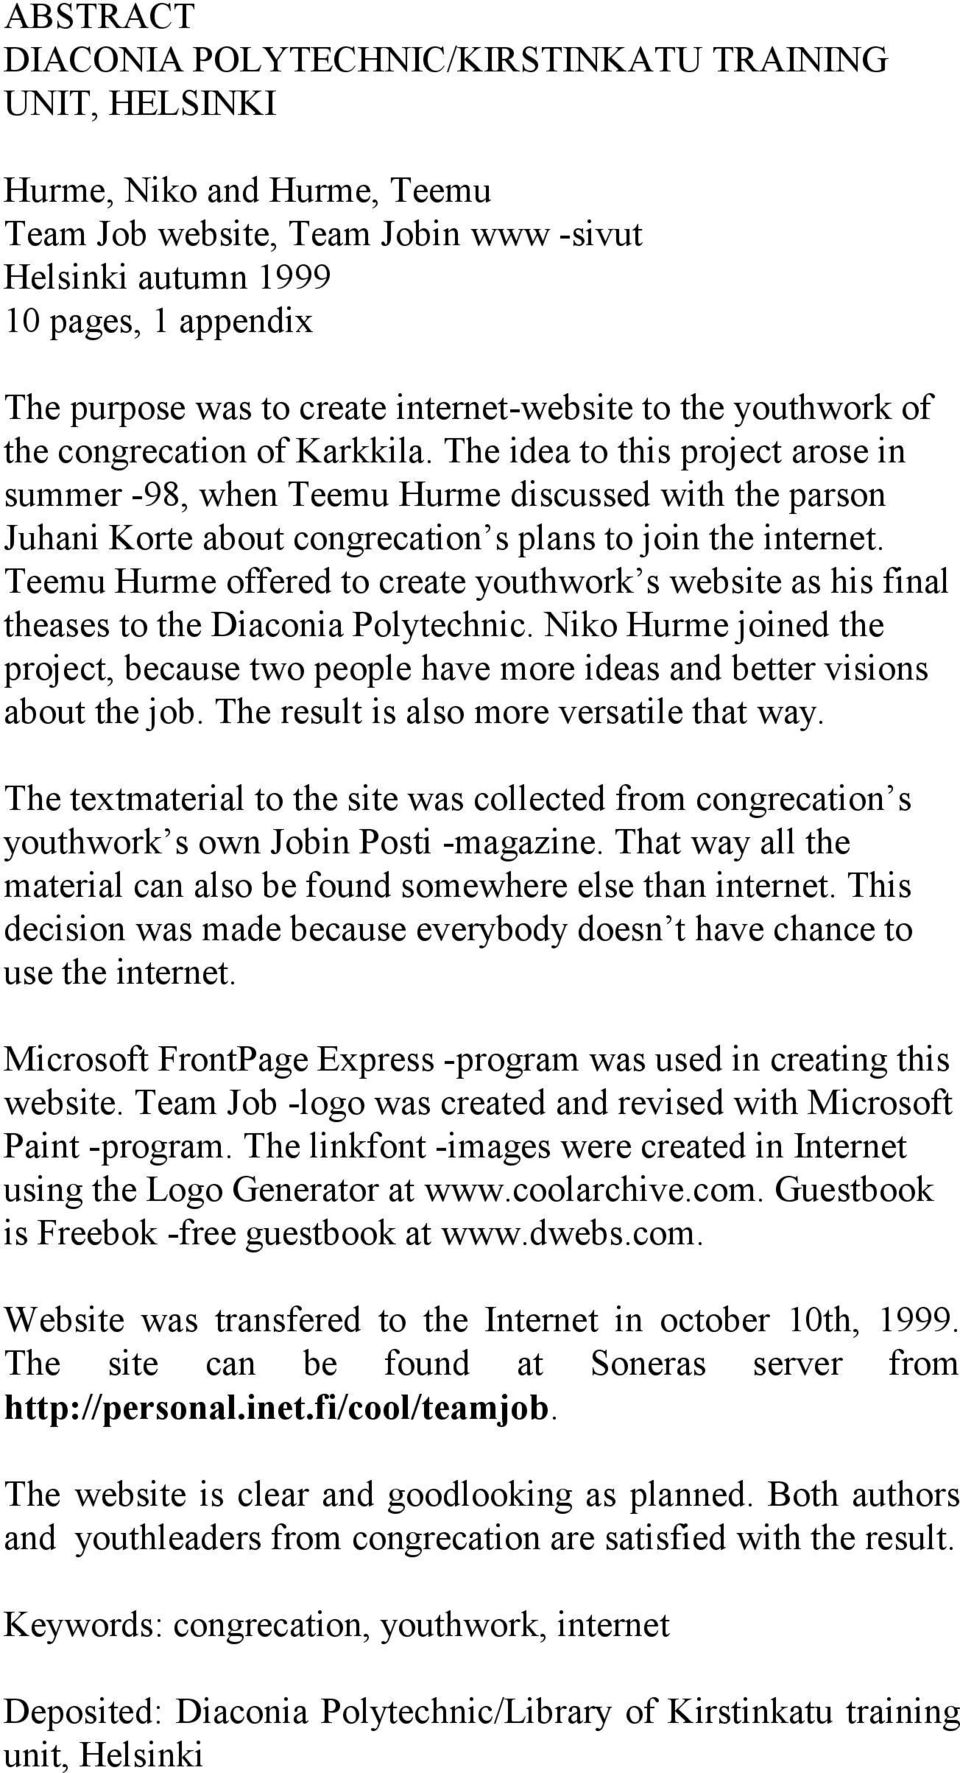 The idea to this project arose in summer -98, when Teemu Hurme discussed with the parson Juhani Korte about congrecation s plans to join the internet.